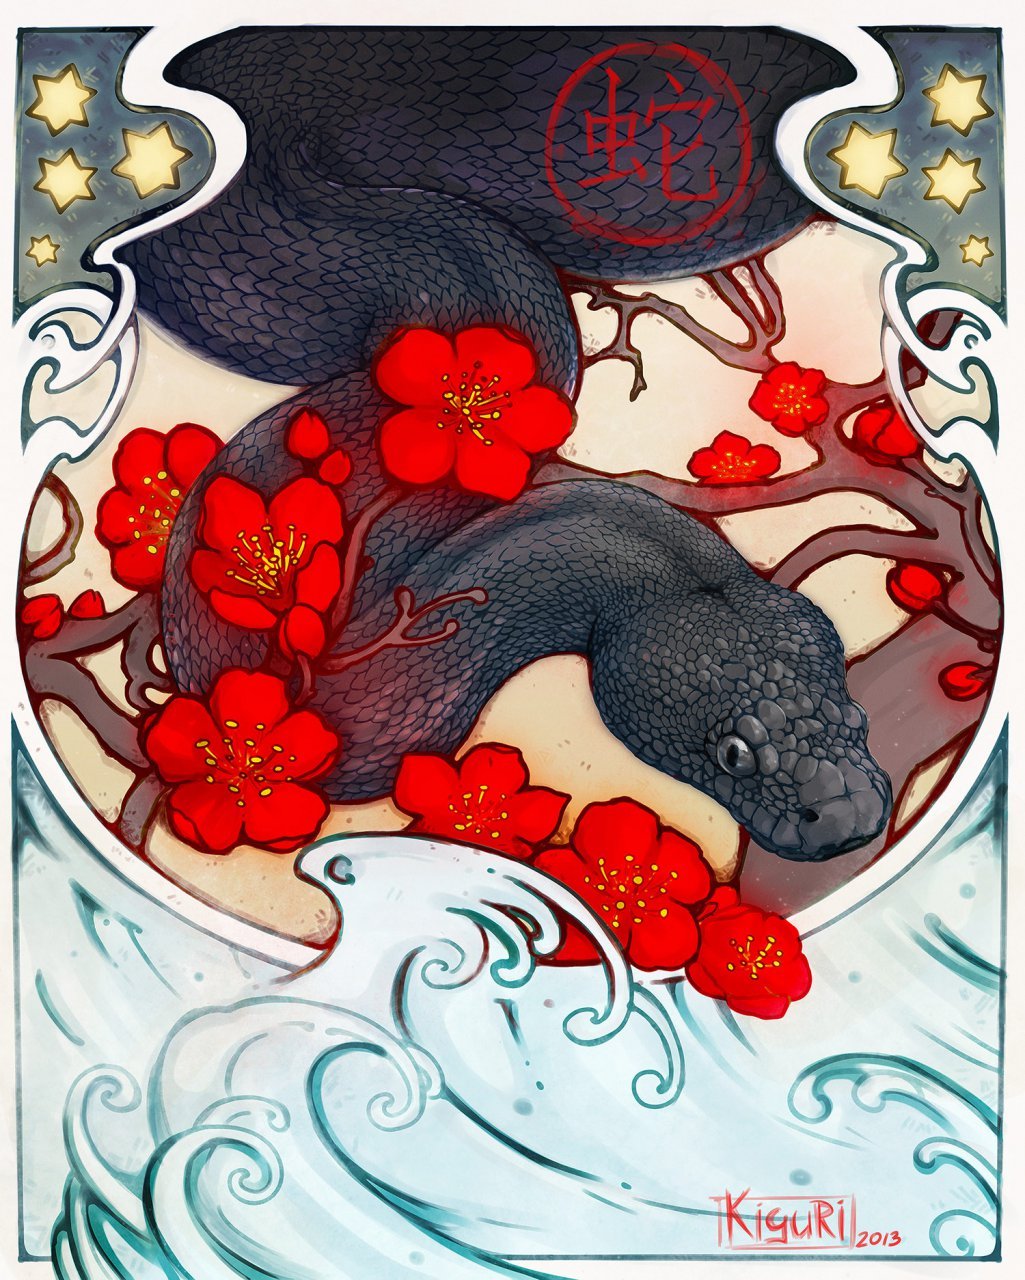 The black water snake of the New Year - by Kiguri